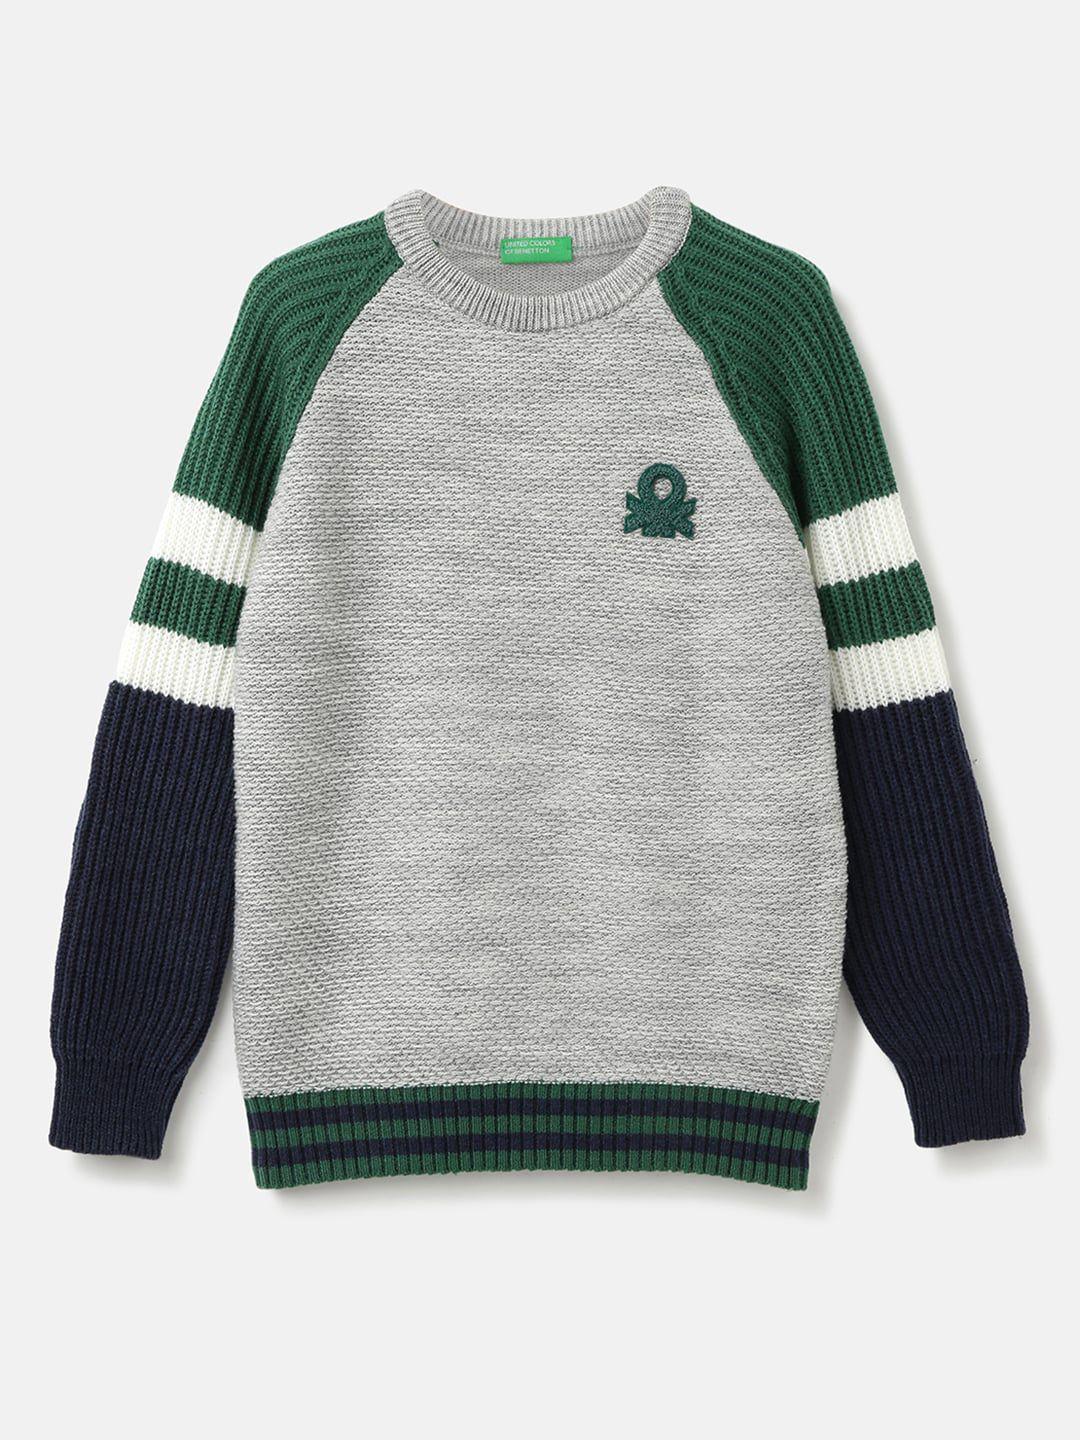 United Colors of Benetton Boys Round Neck Colourblocked Pullover Sweater